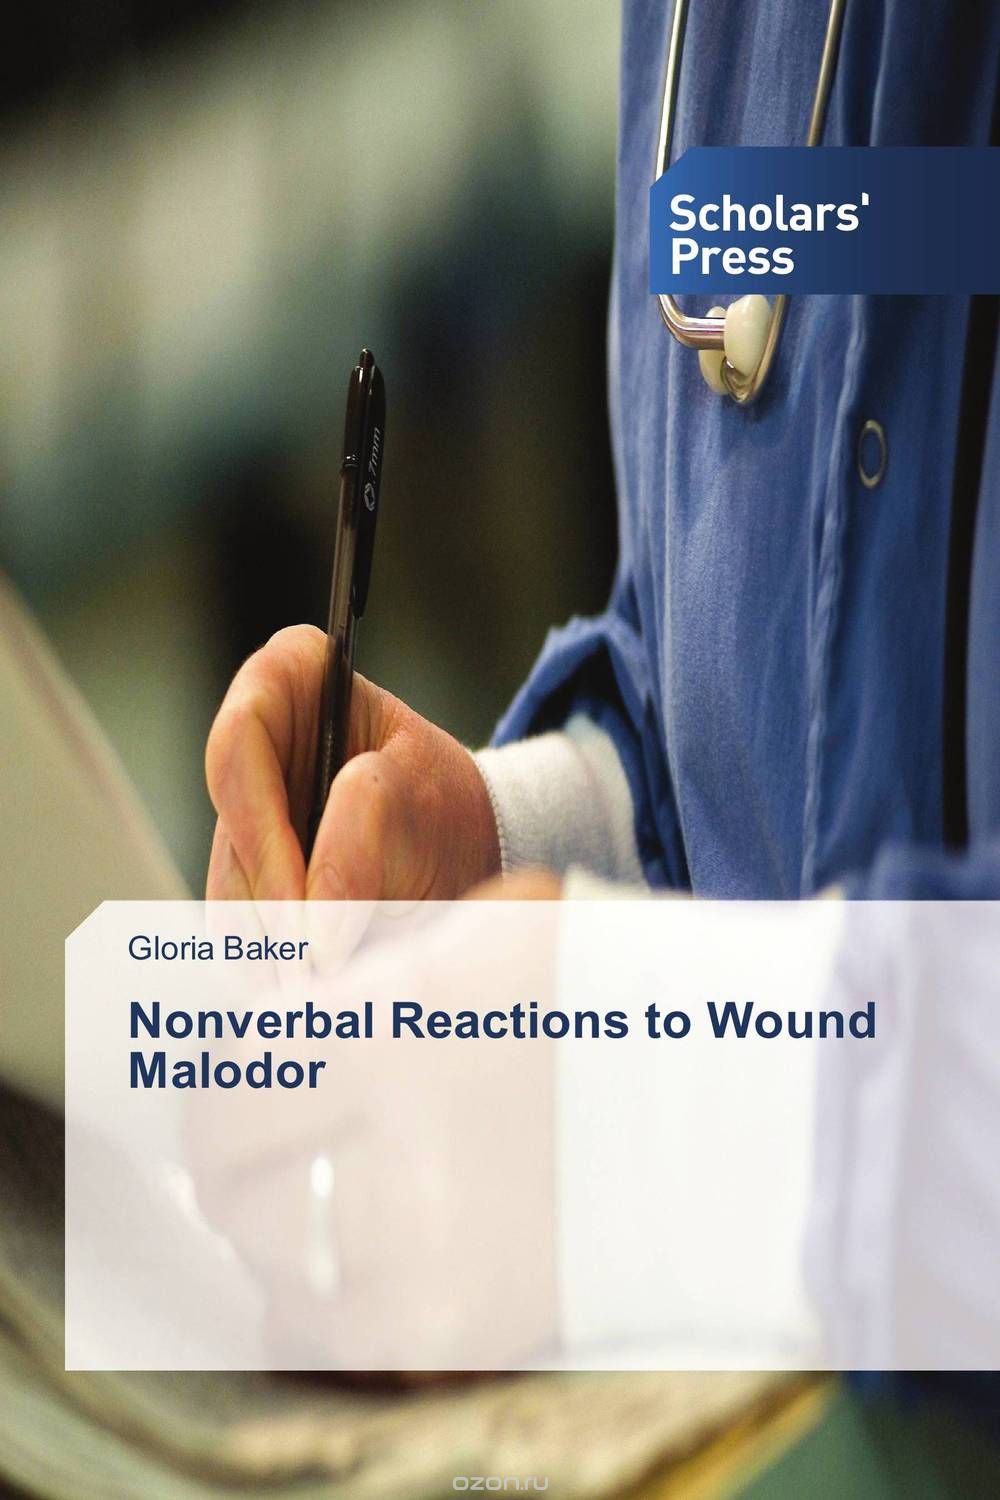 Nonverbal Reactions to Wound Malodor